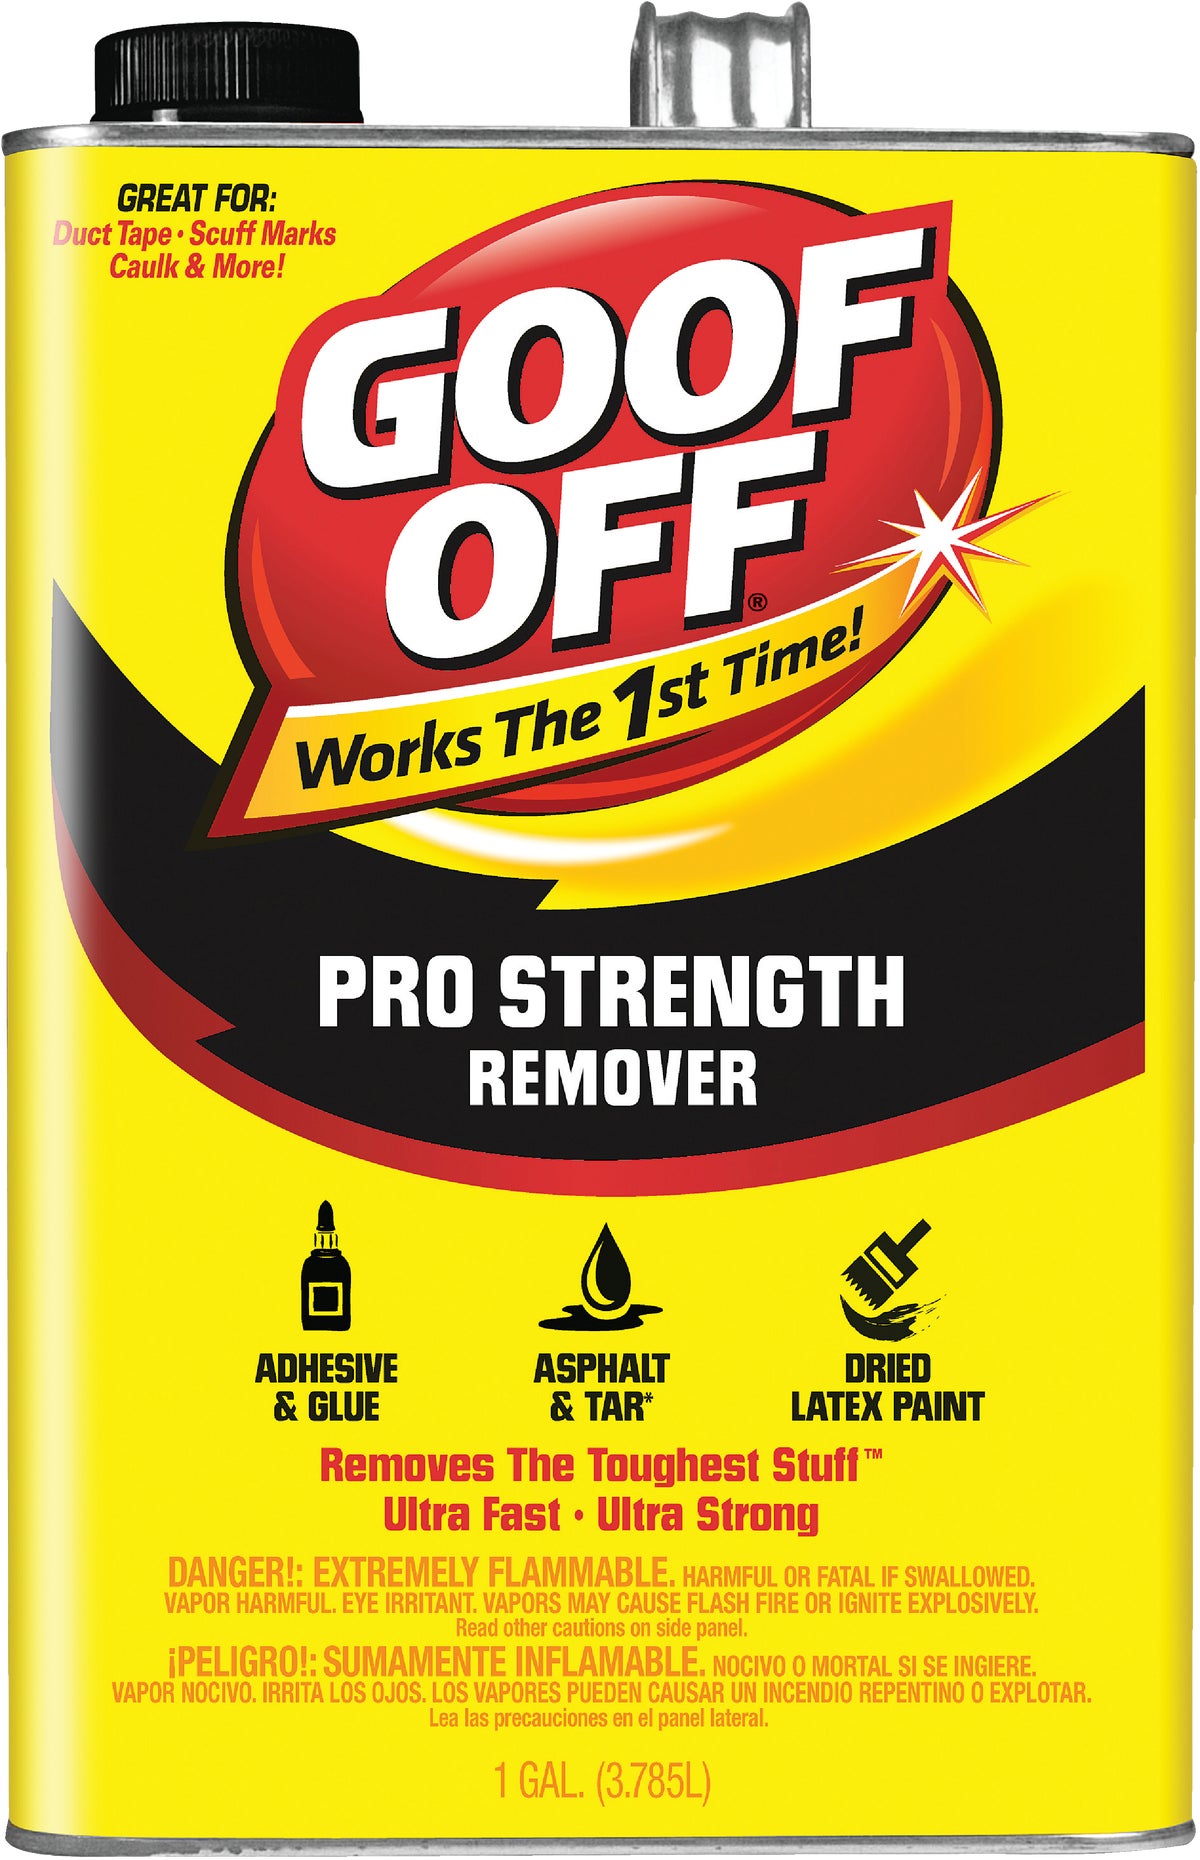 Buy Goof Off Pro Strength Remover 1 Gal.